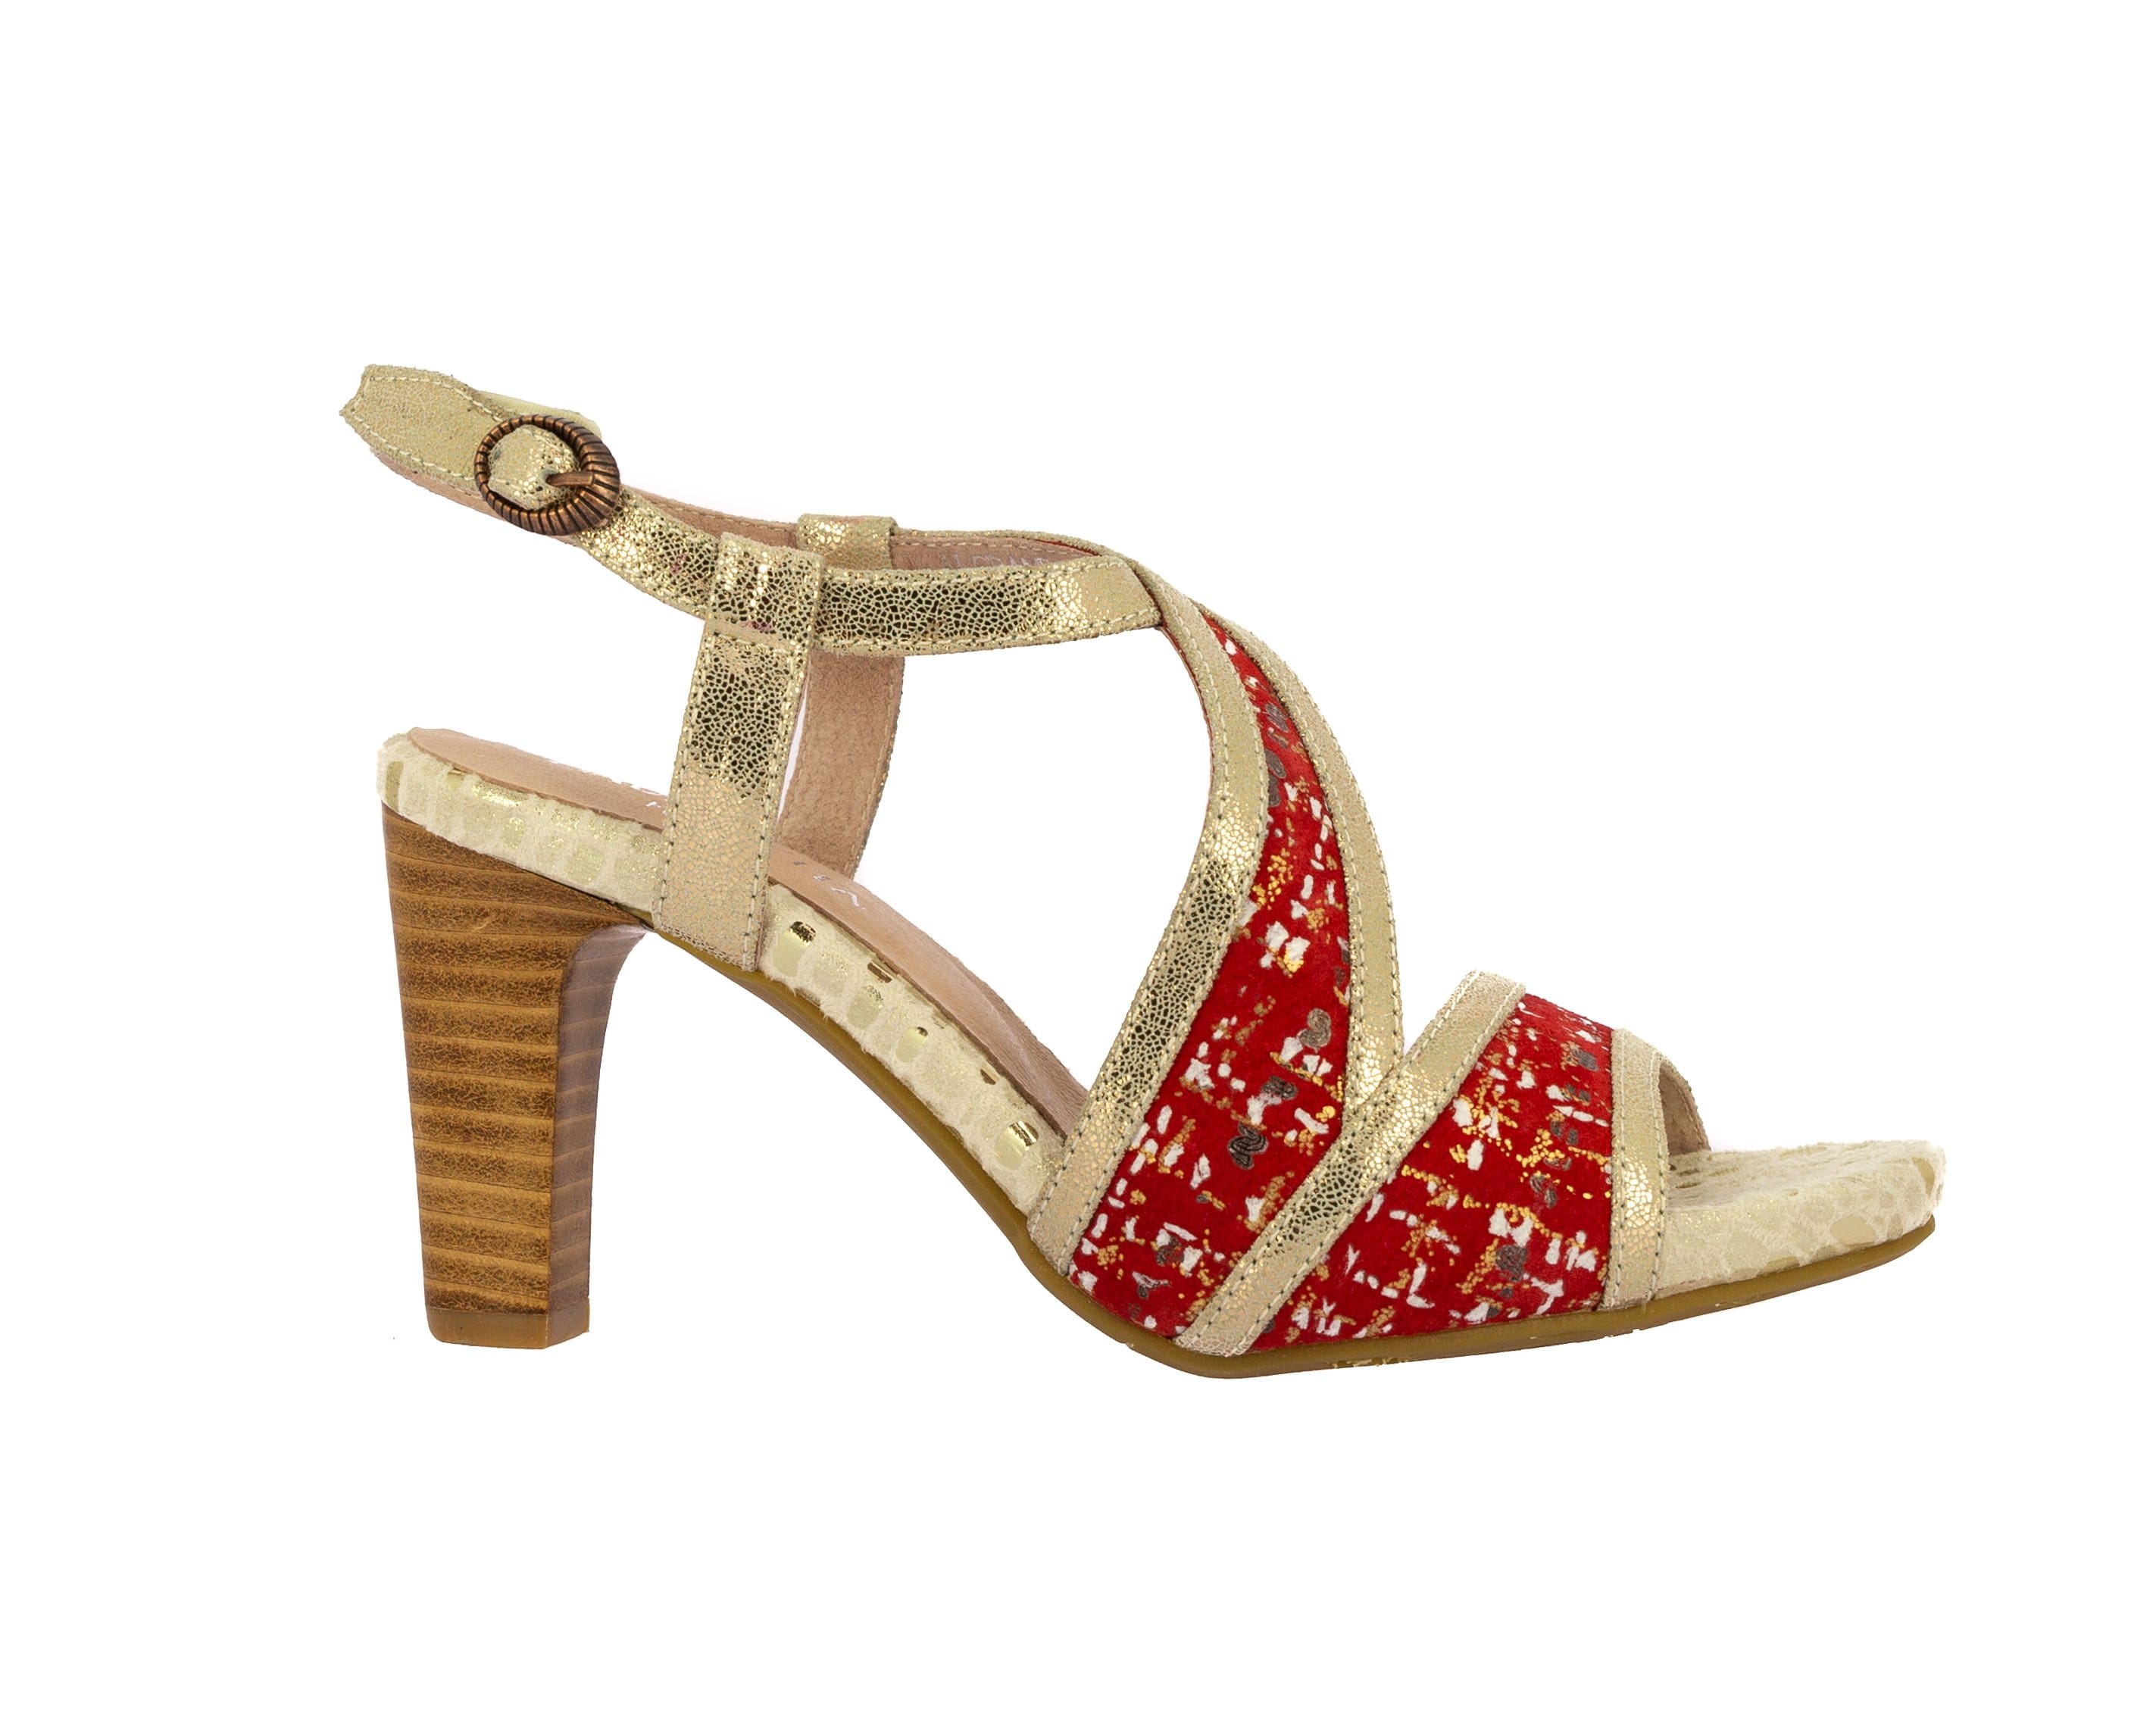 Schuhe ALCBANEO 101 - 35 / RED - Sandale